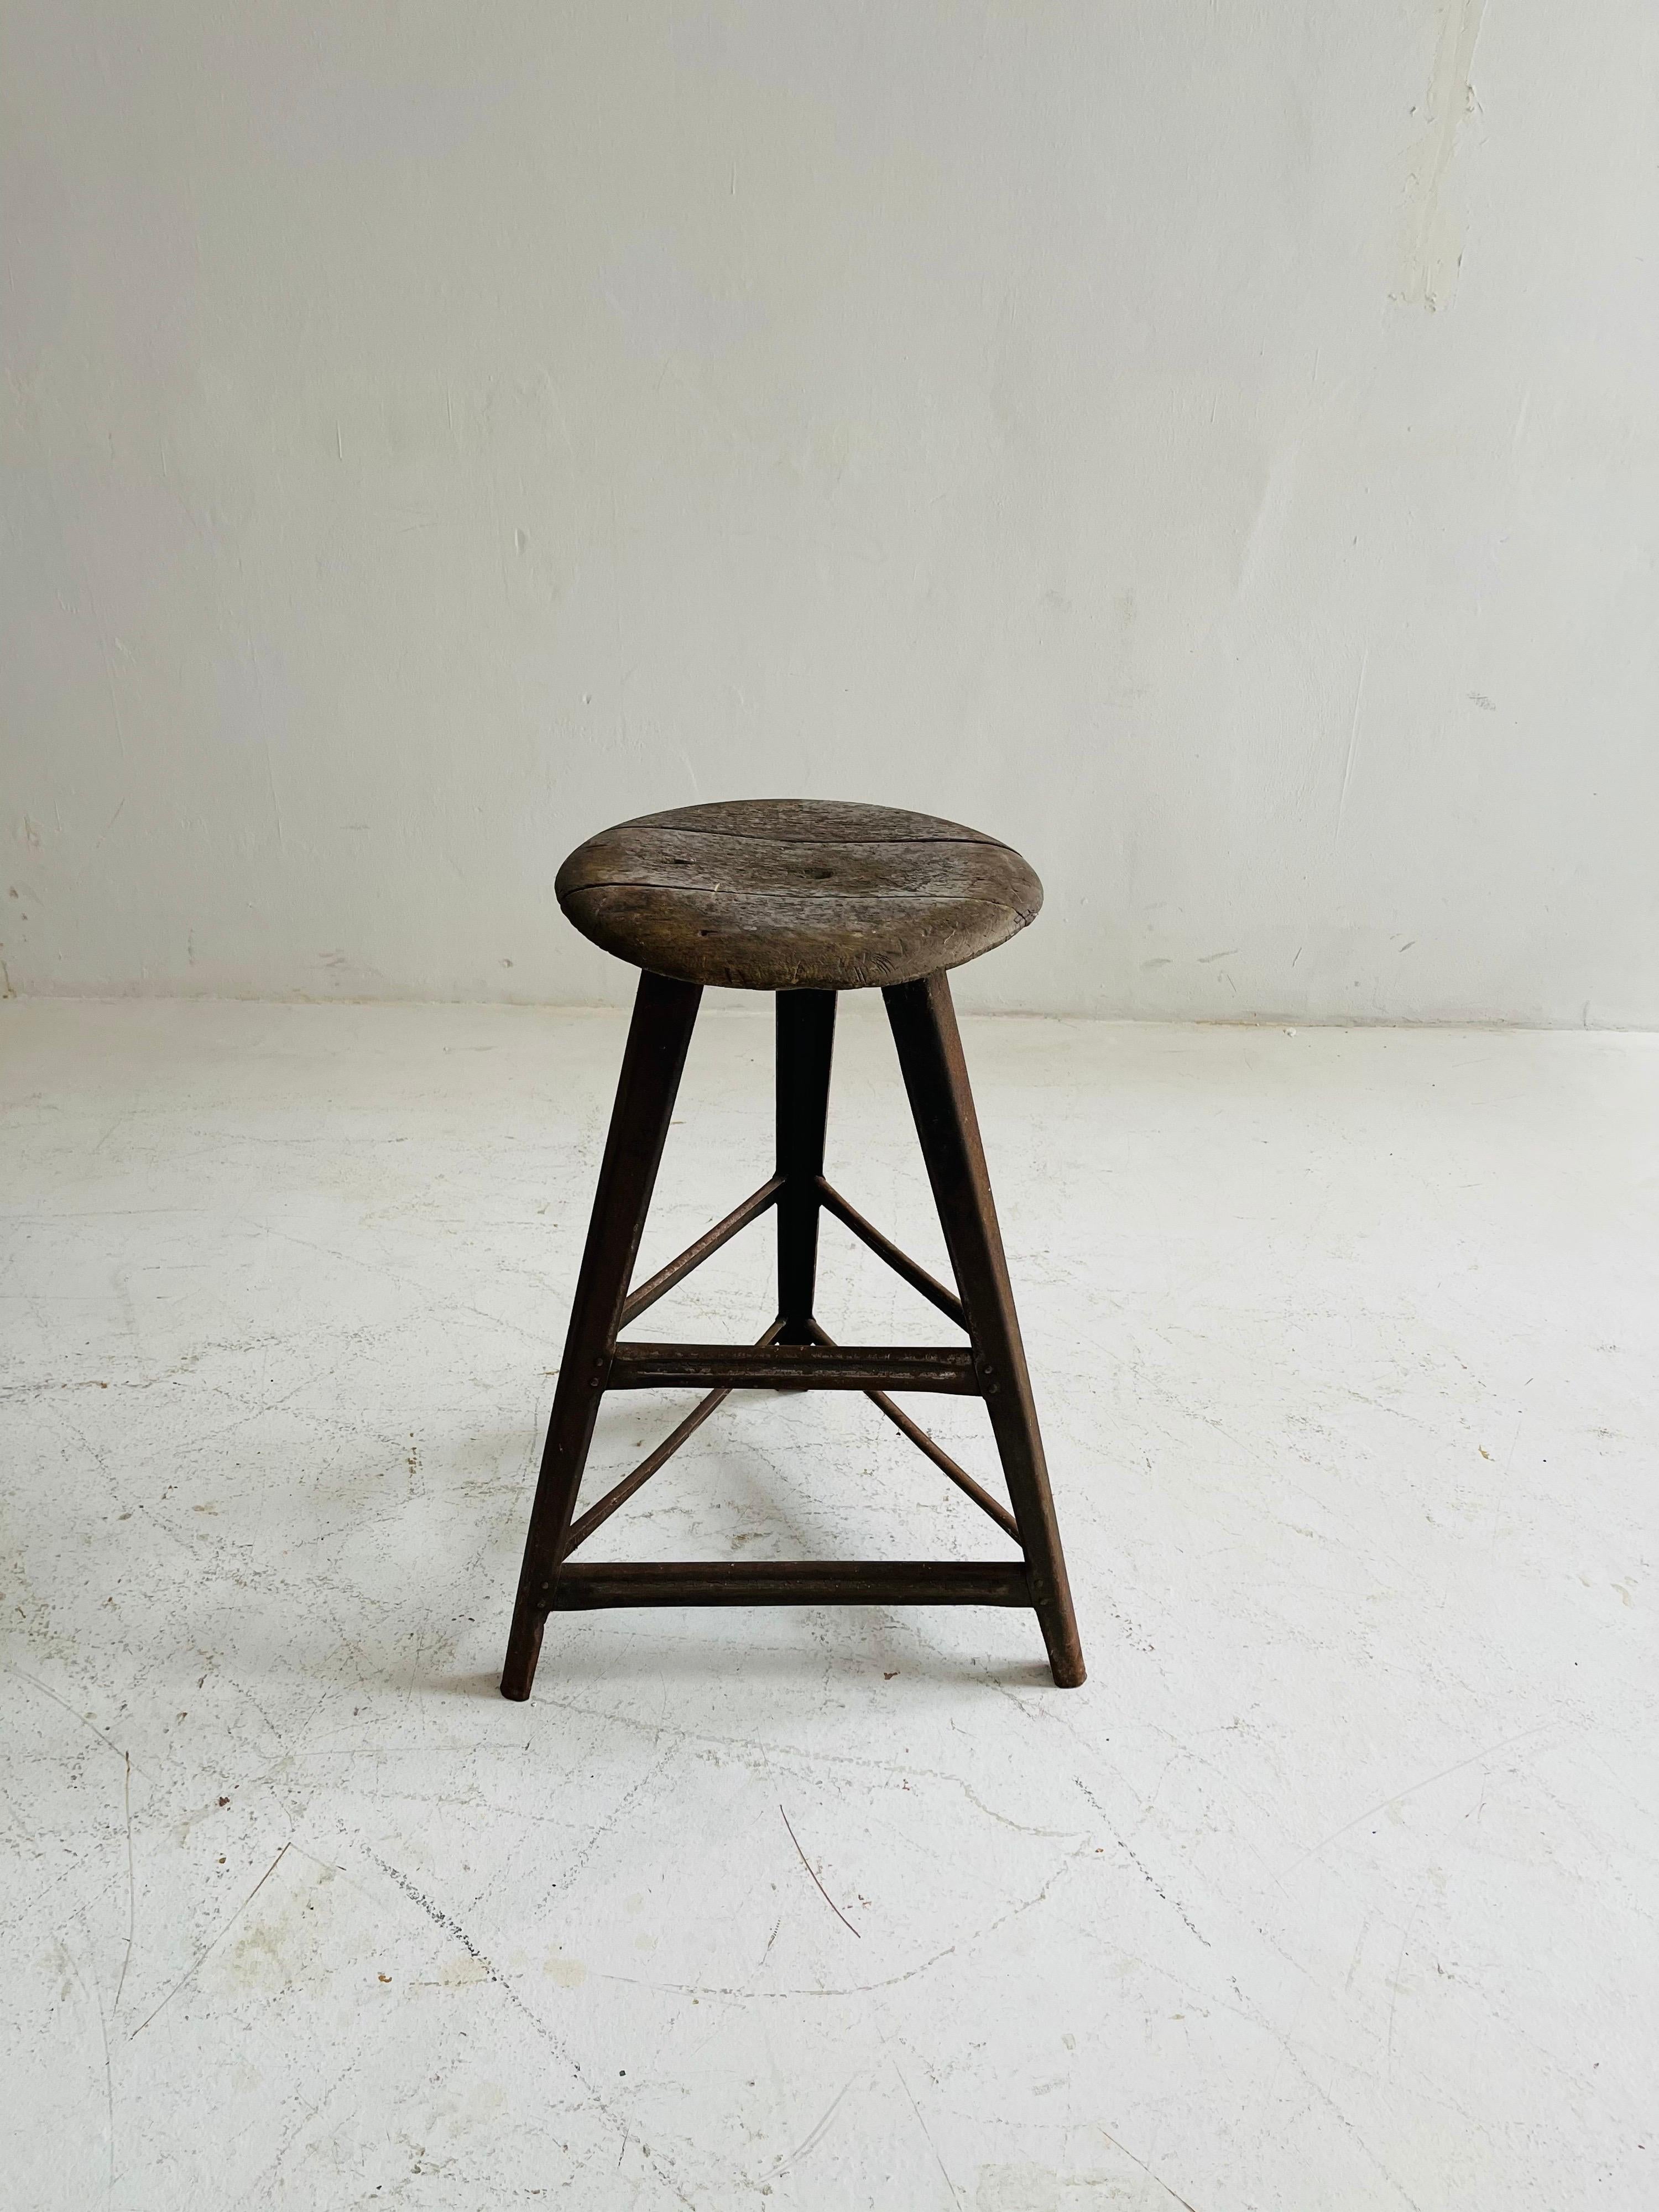 Patinated Industrial Factory Stools Group of Six, Austria, 1930s For Sale 1